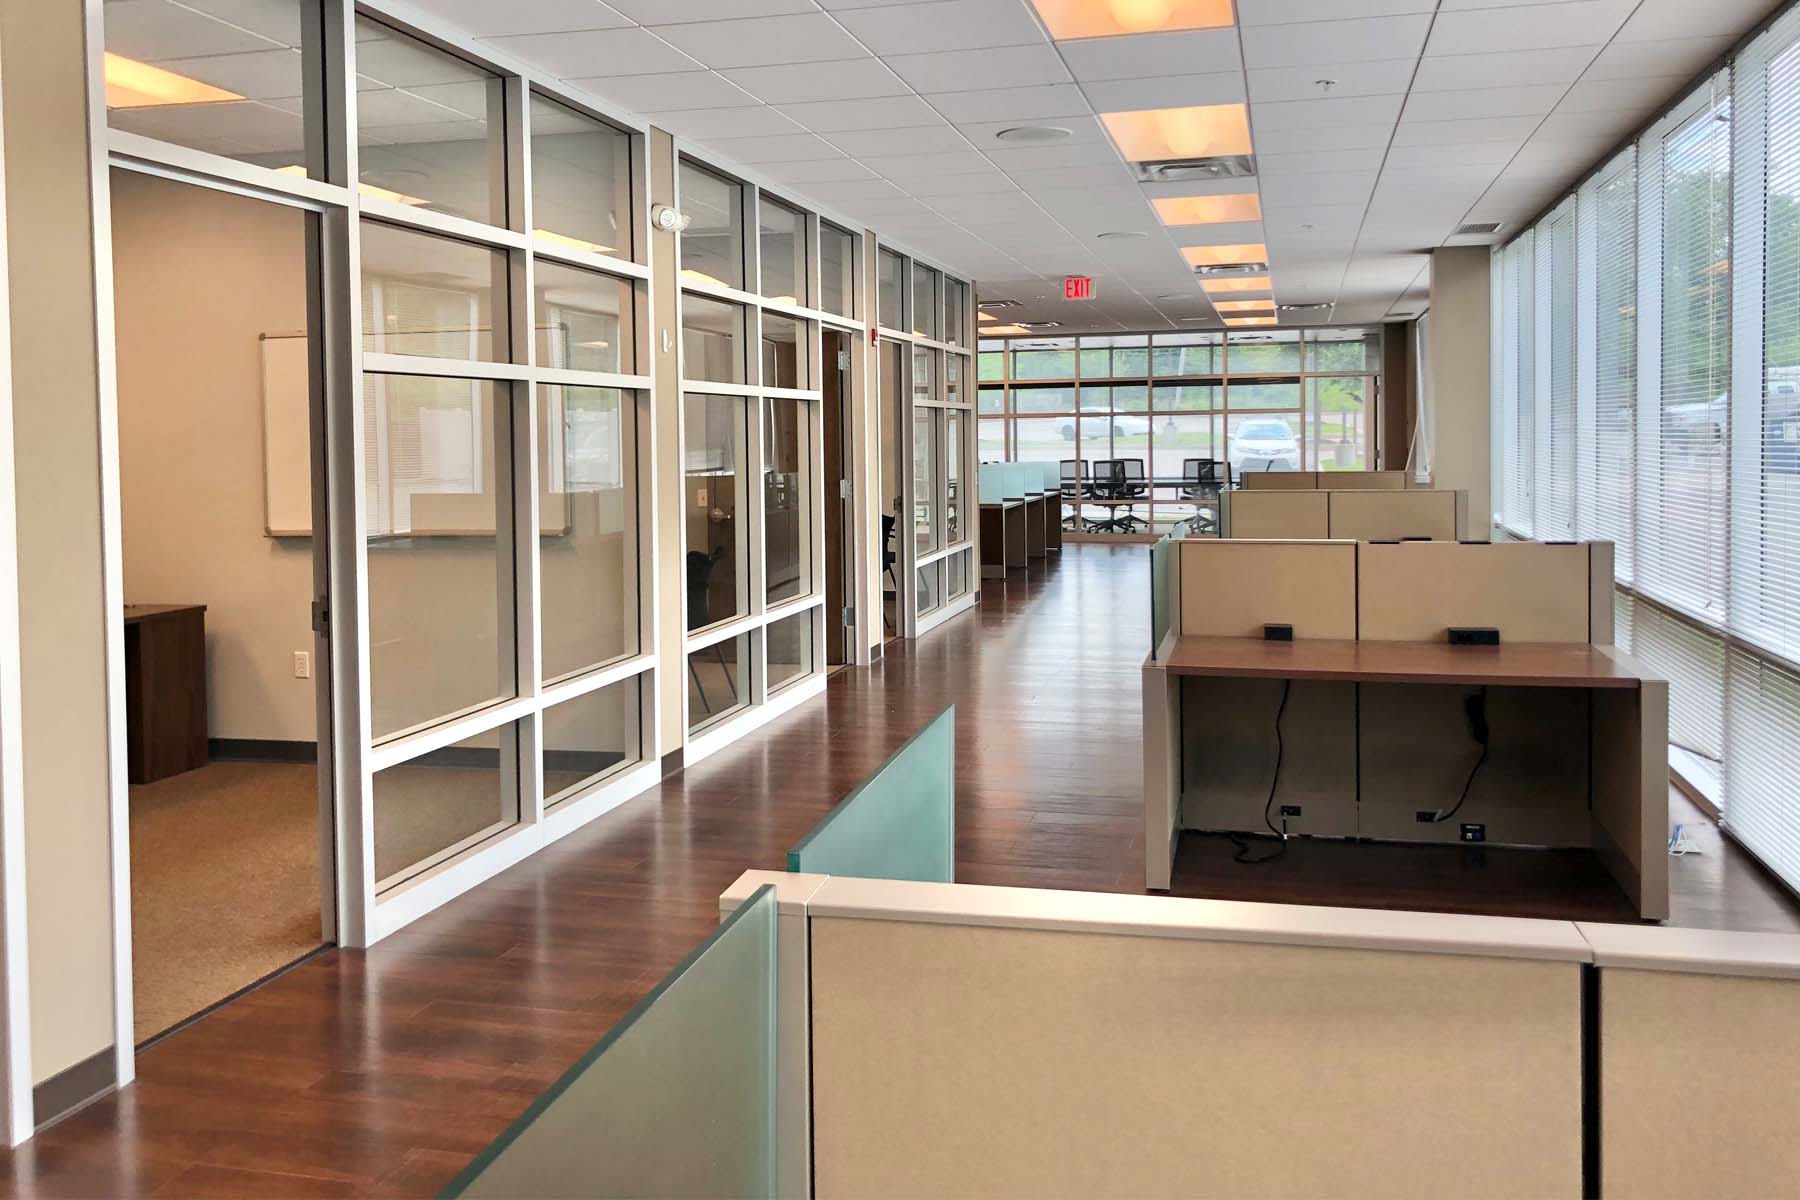 Hallway with private offices on left and desk cubicles to right